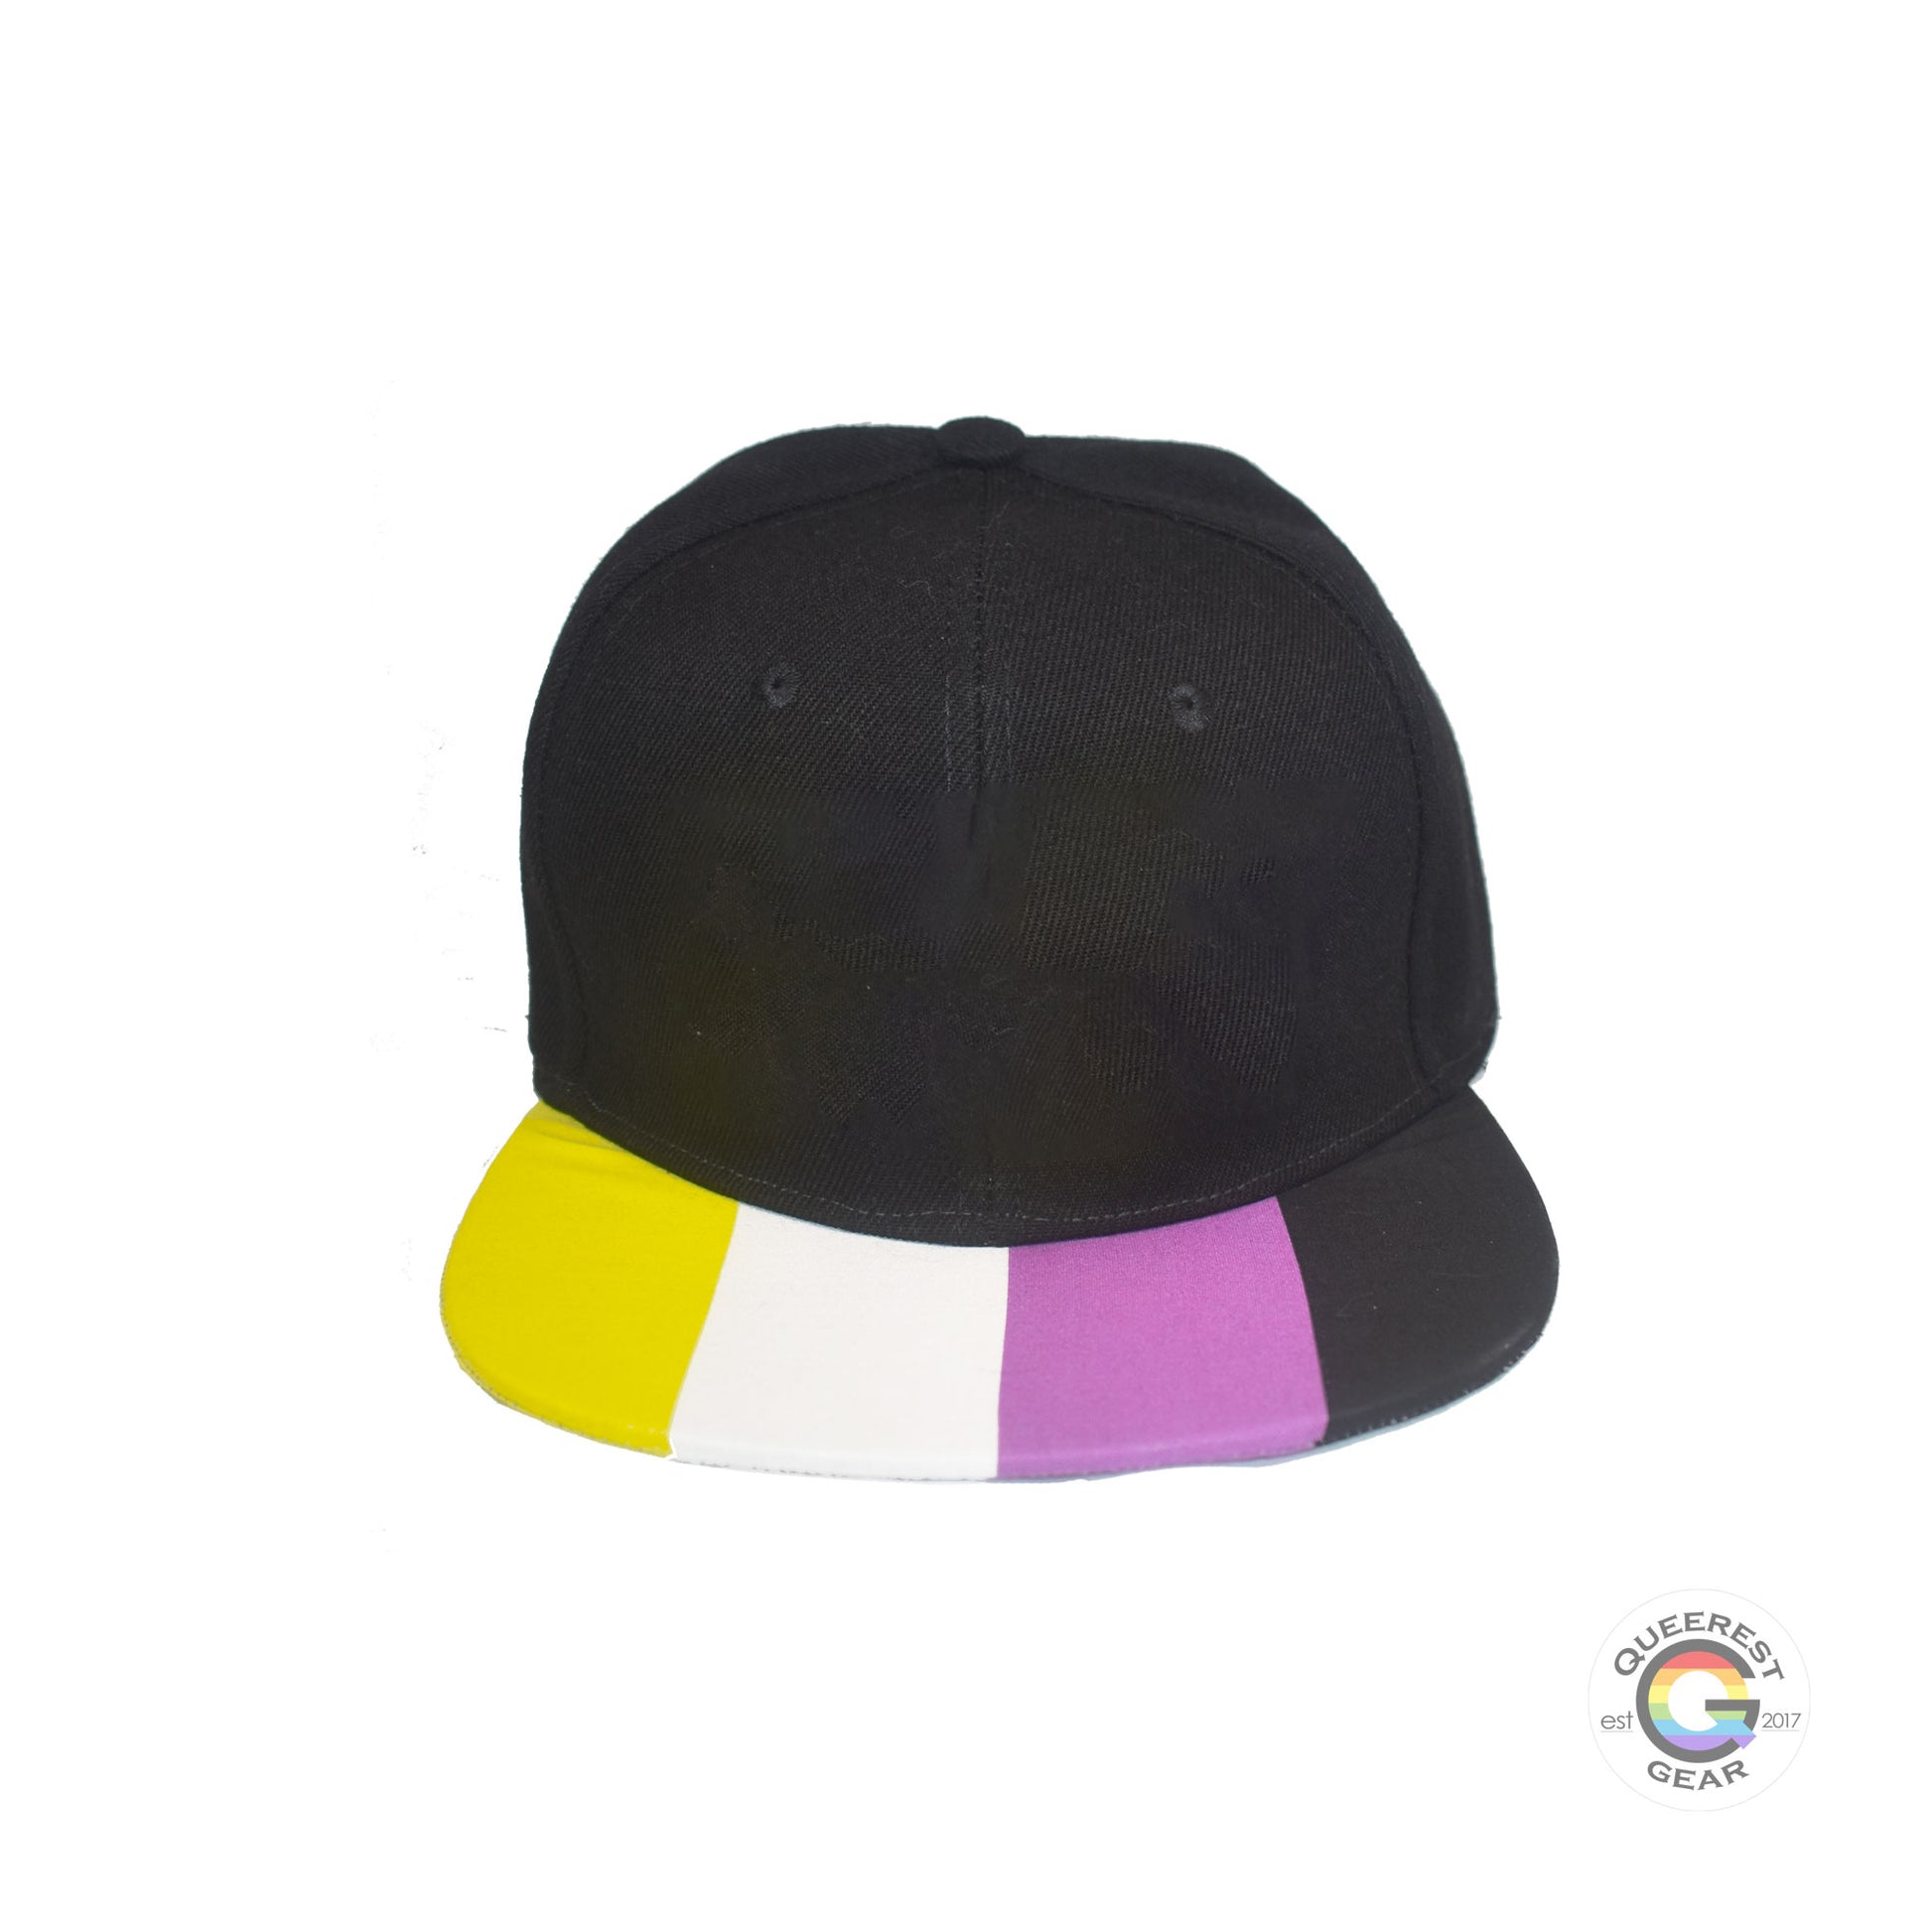 Black flat bill snapback hat. The brim has the nonbinary pride flag on both sides. Front view